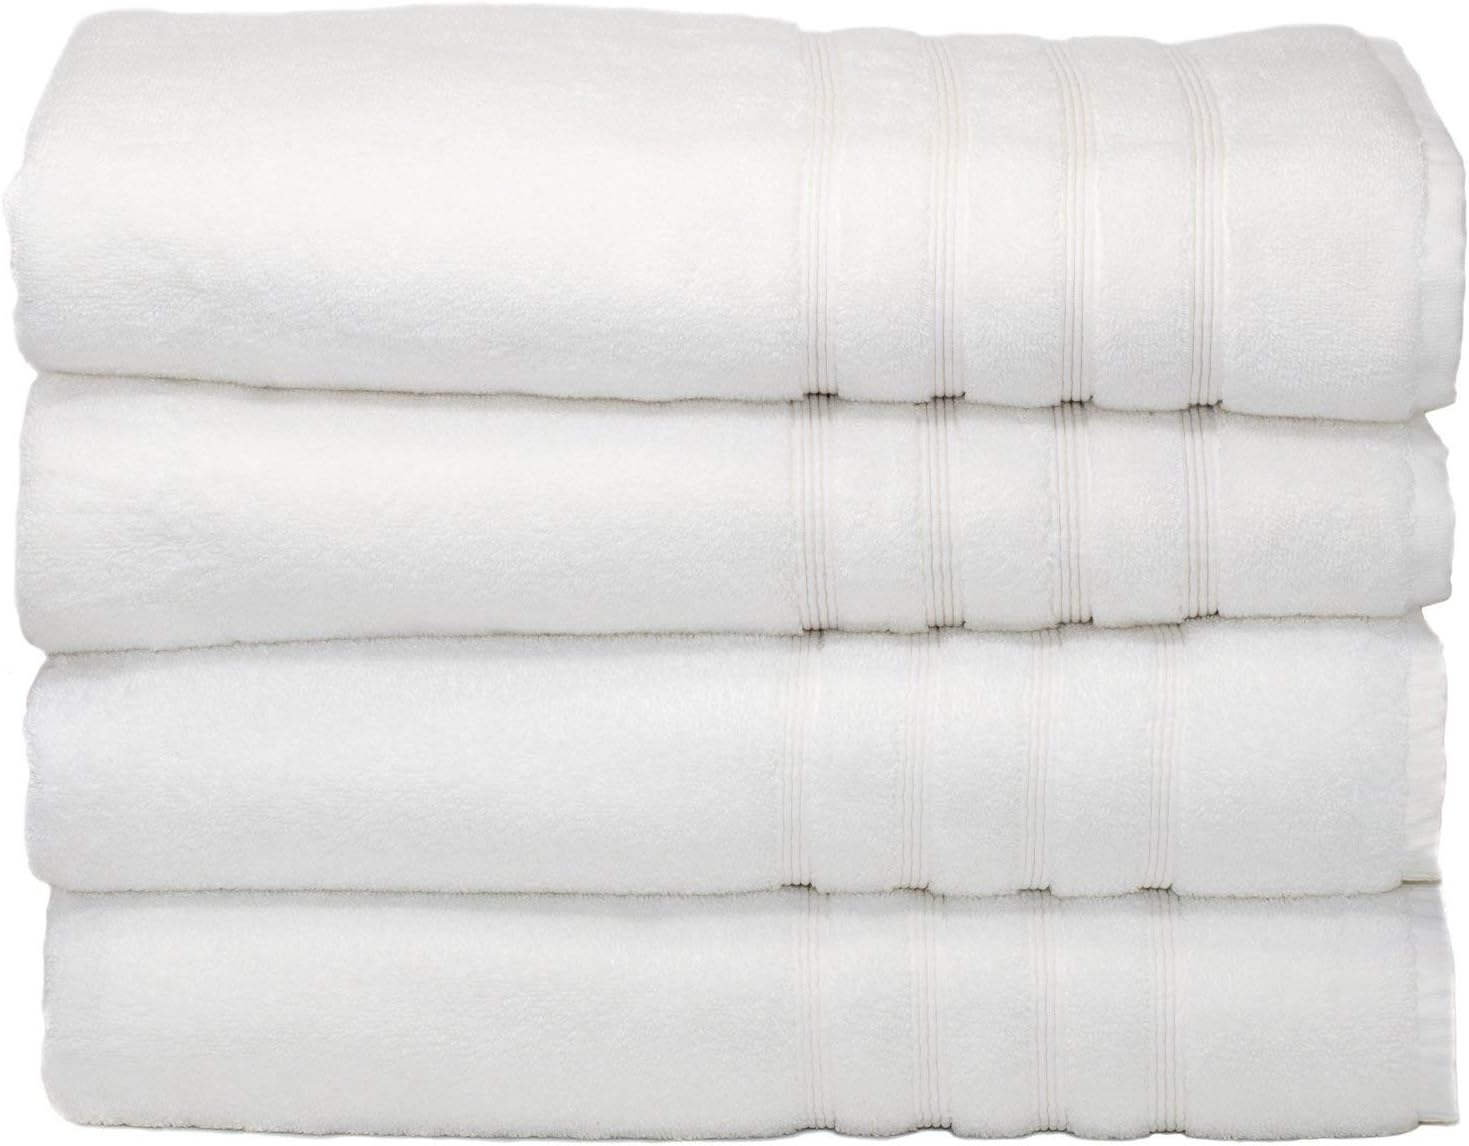 2 Pack Oversize Bamboo Cotton Bath Towels Premium Ultra Soft Absorbent Towel 